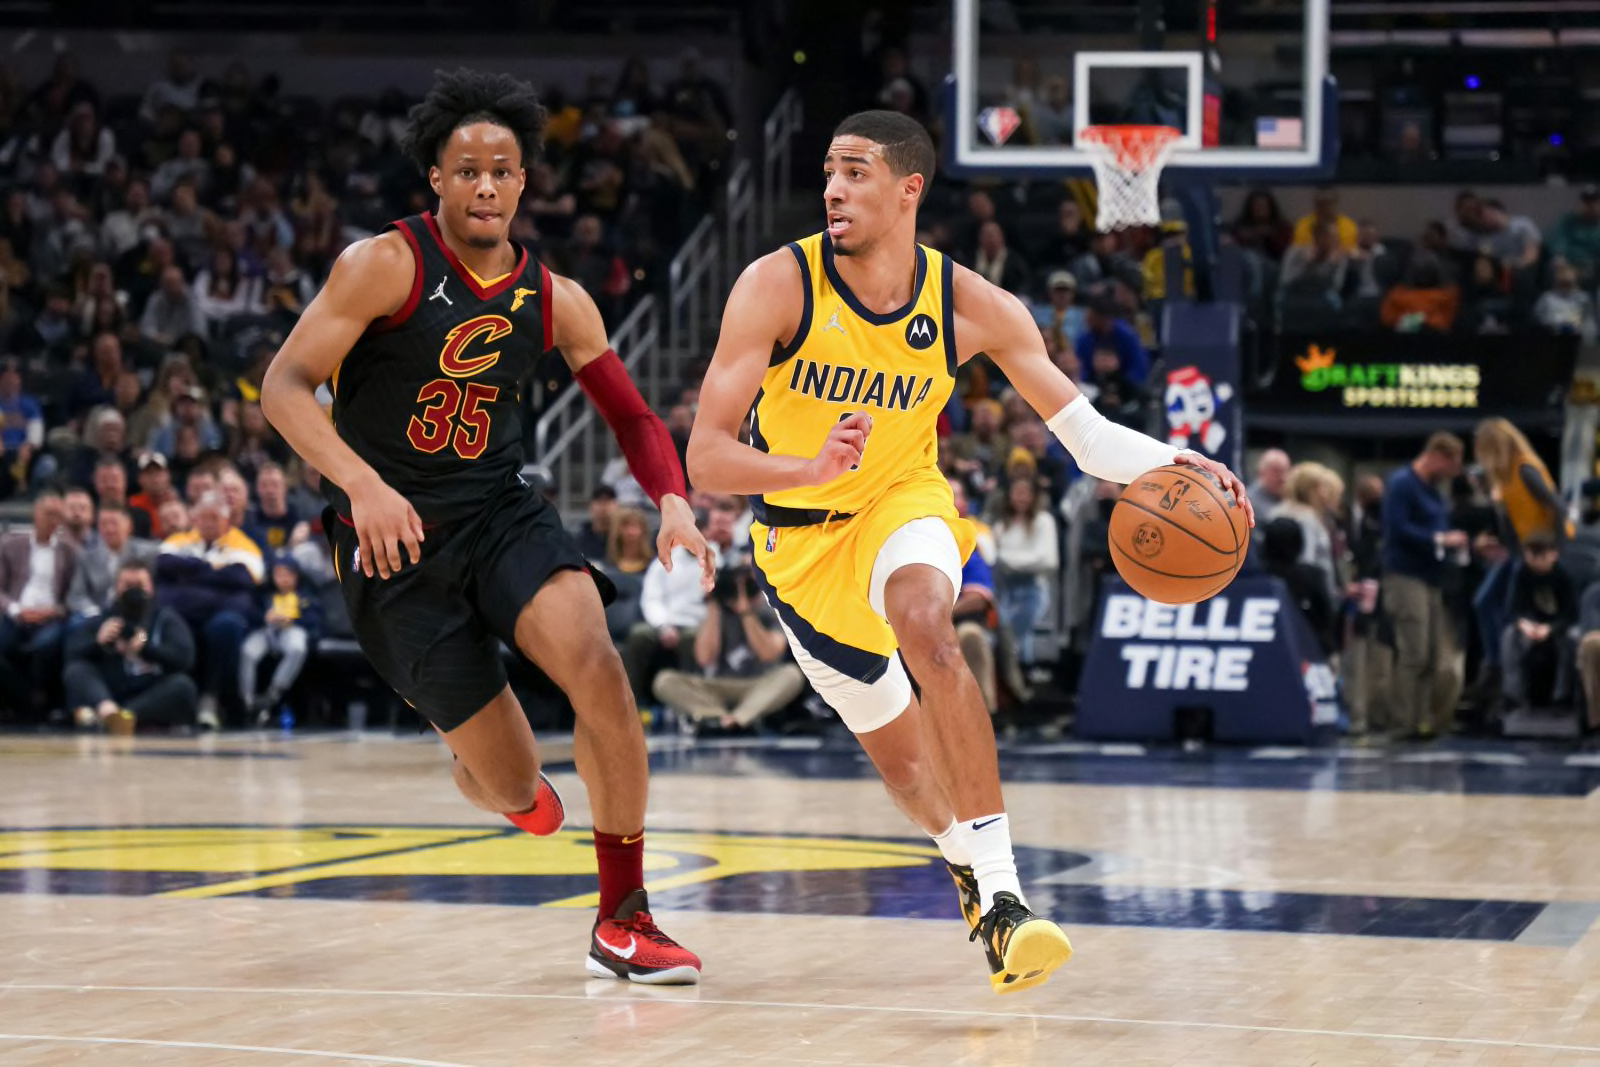 Tyrese Haliburton continues his assisting masterclass with a 19-dime game -  Basketball Network - Your daily dose of basketball